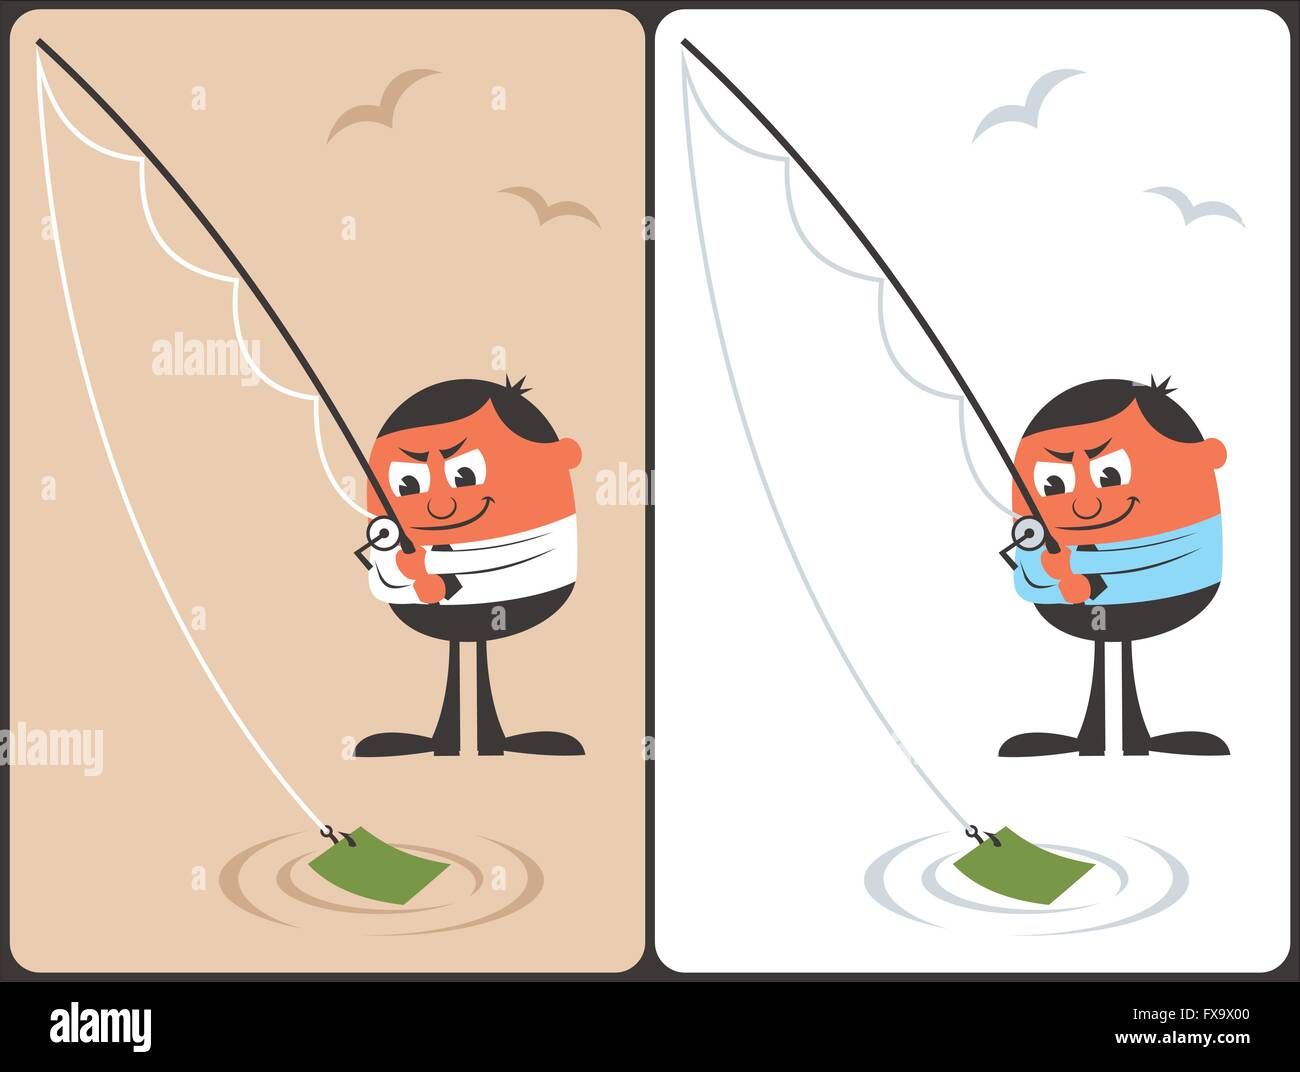 Conceptual illustration with fishing businessman. It is in 2 color versions. No transparency and gradients used. Stock Vector